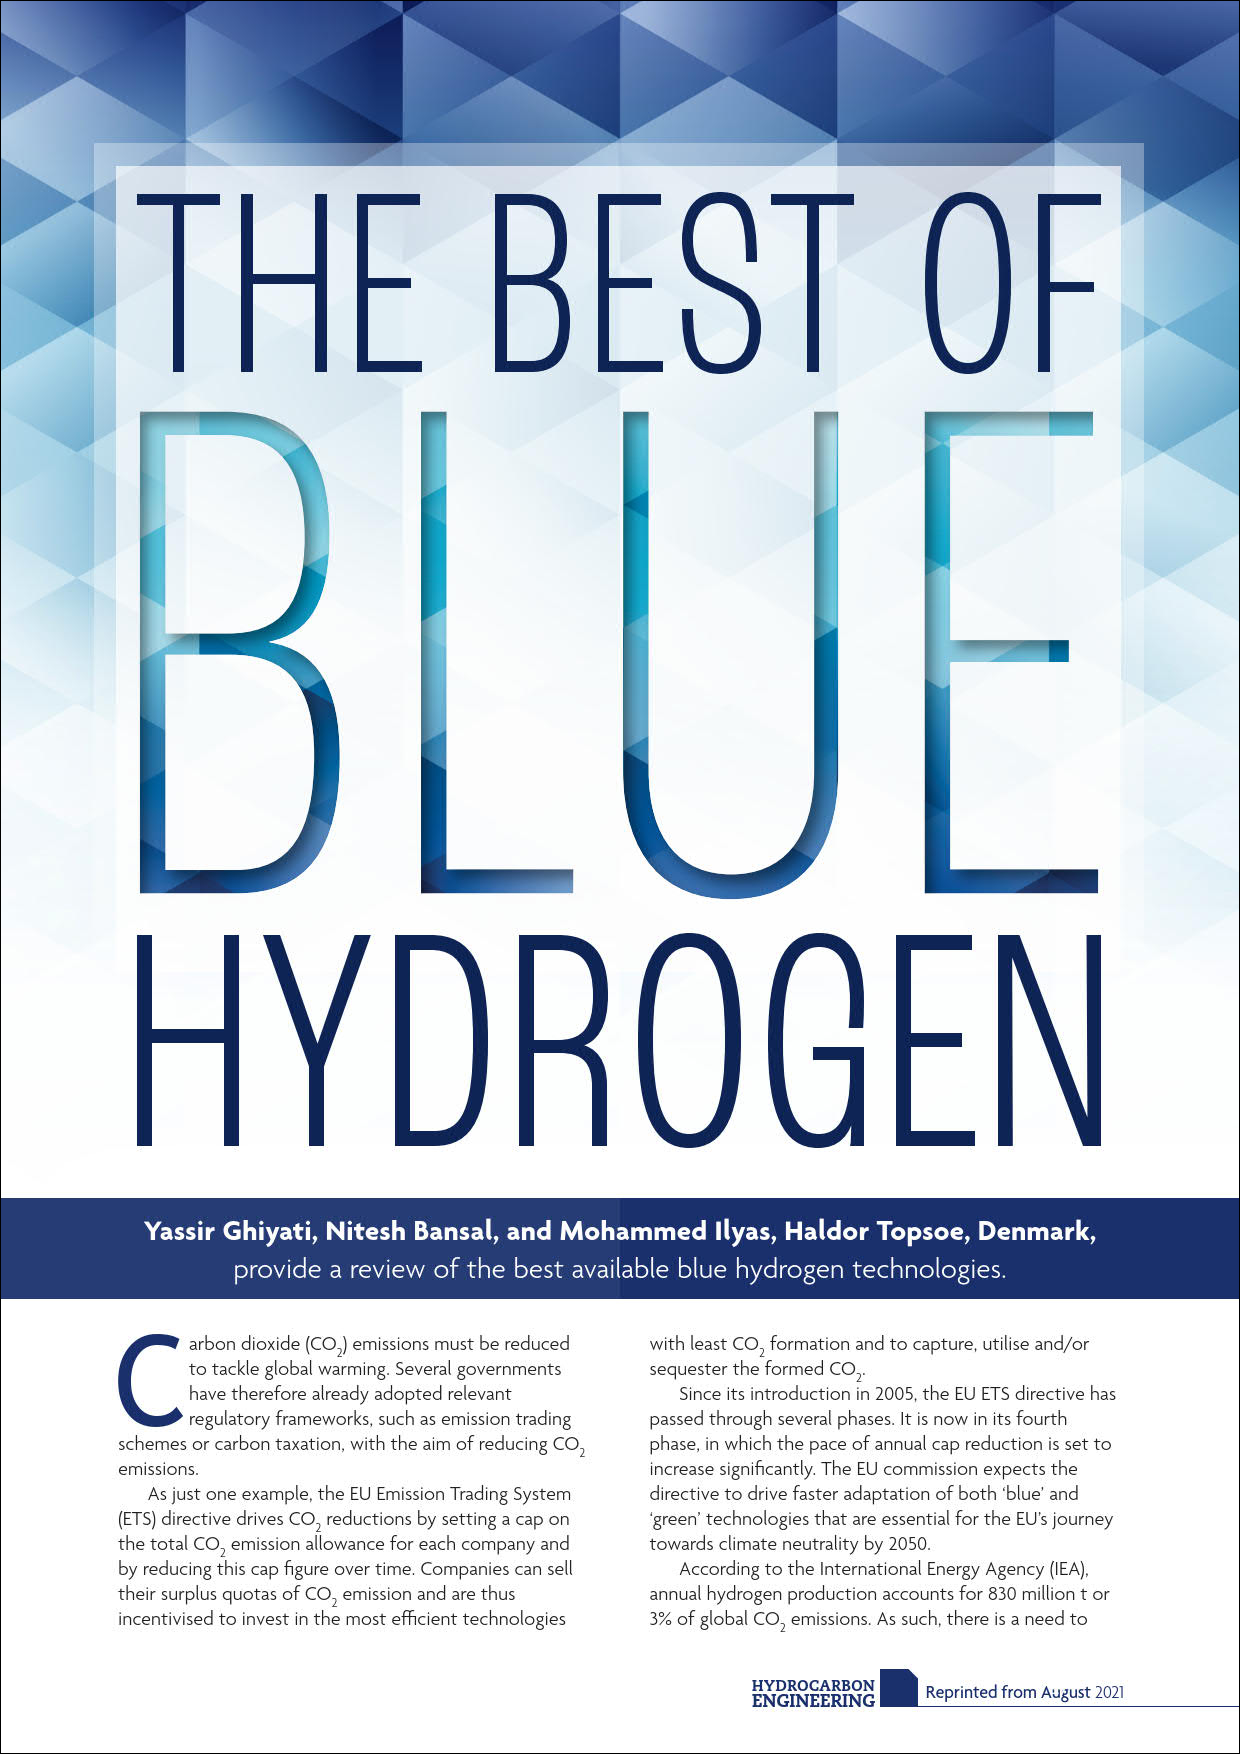 The best of blue hydrogen technologies - article in HCE Aug 2021